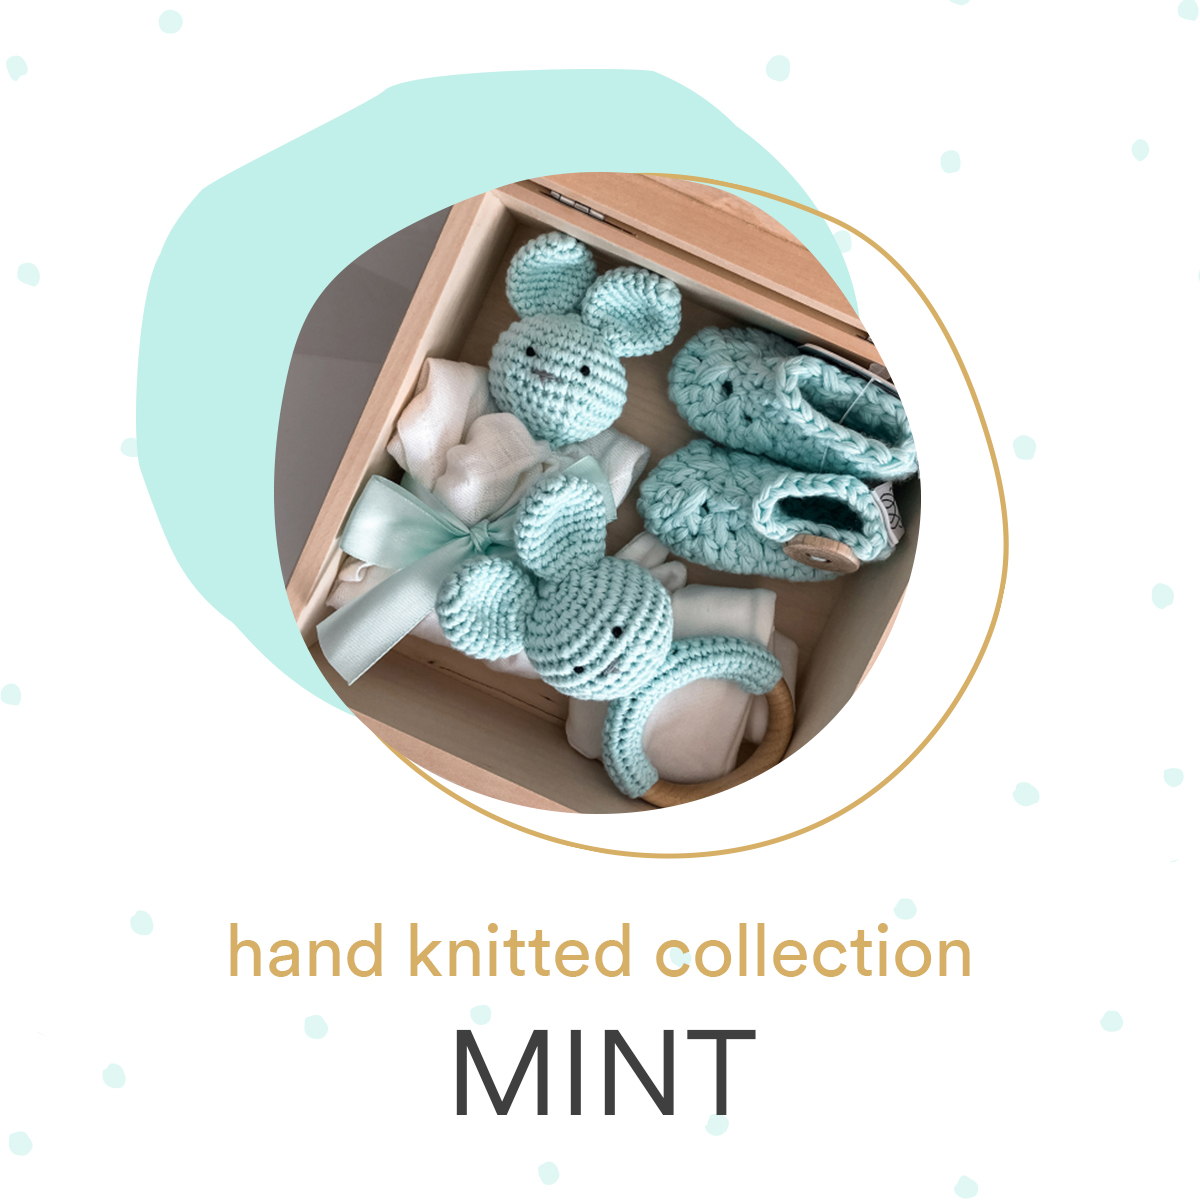 Hand knitted collection - Mint